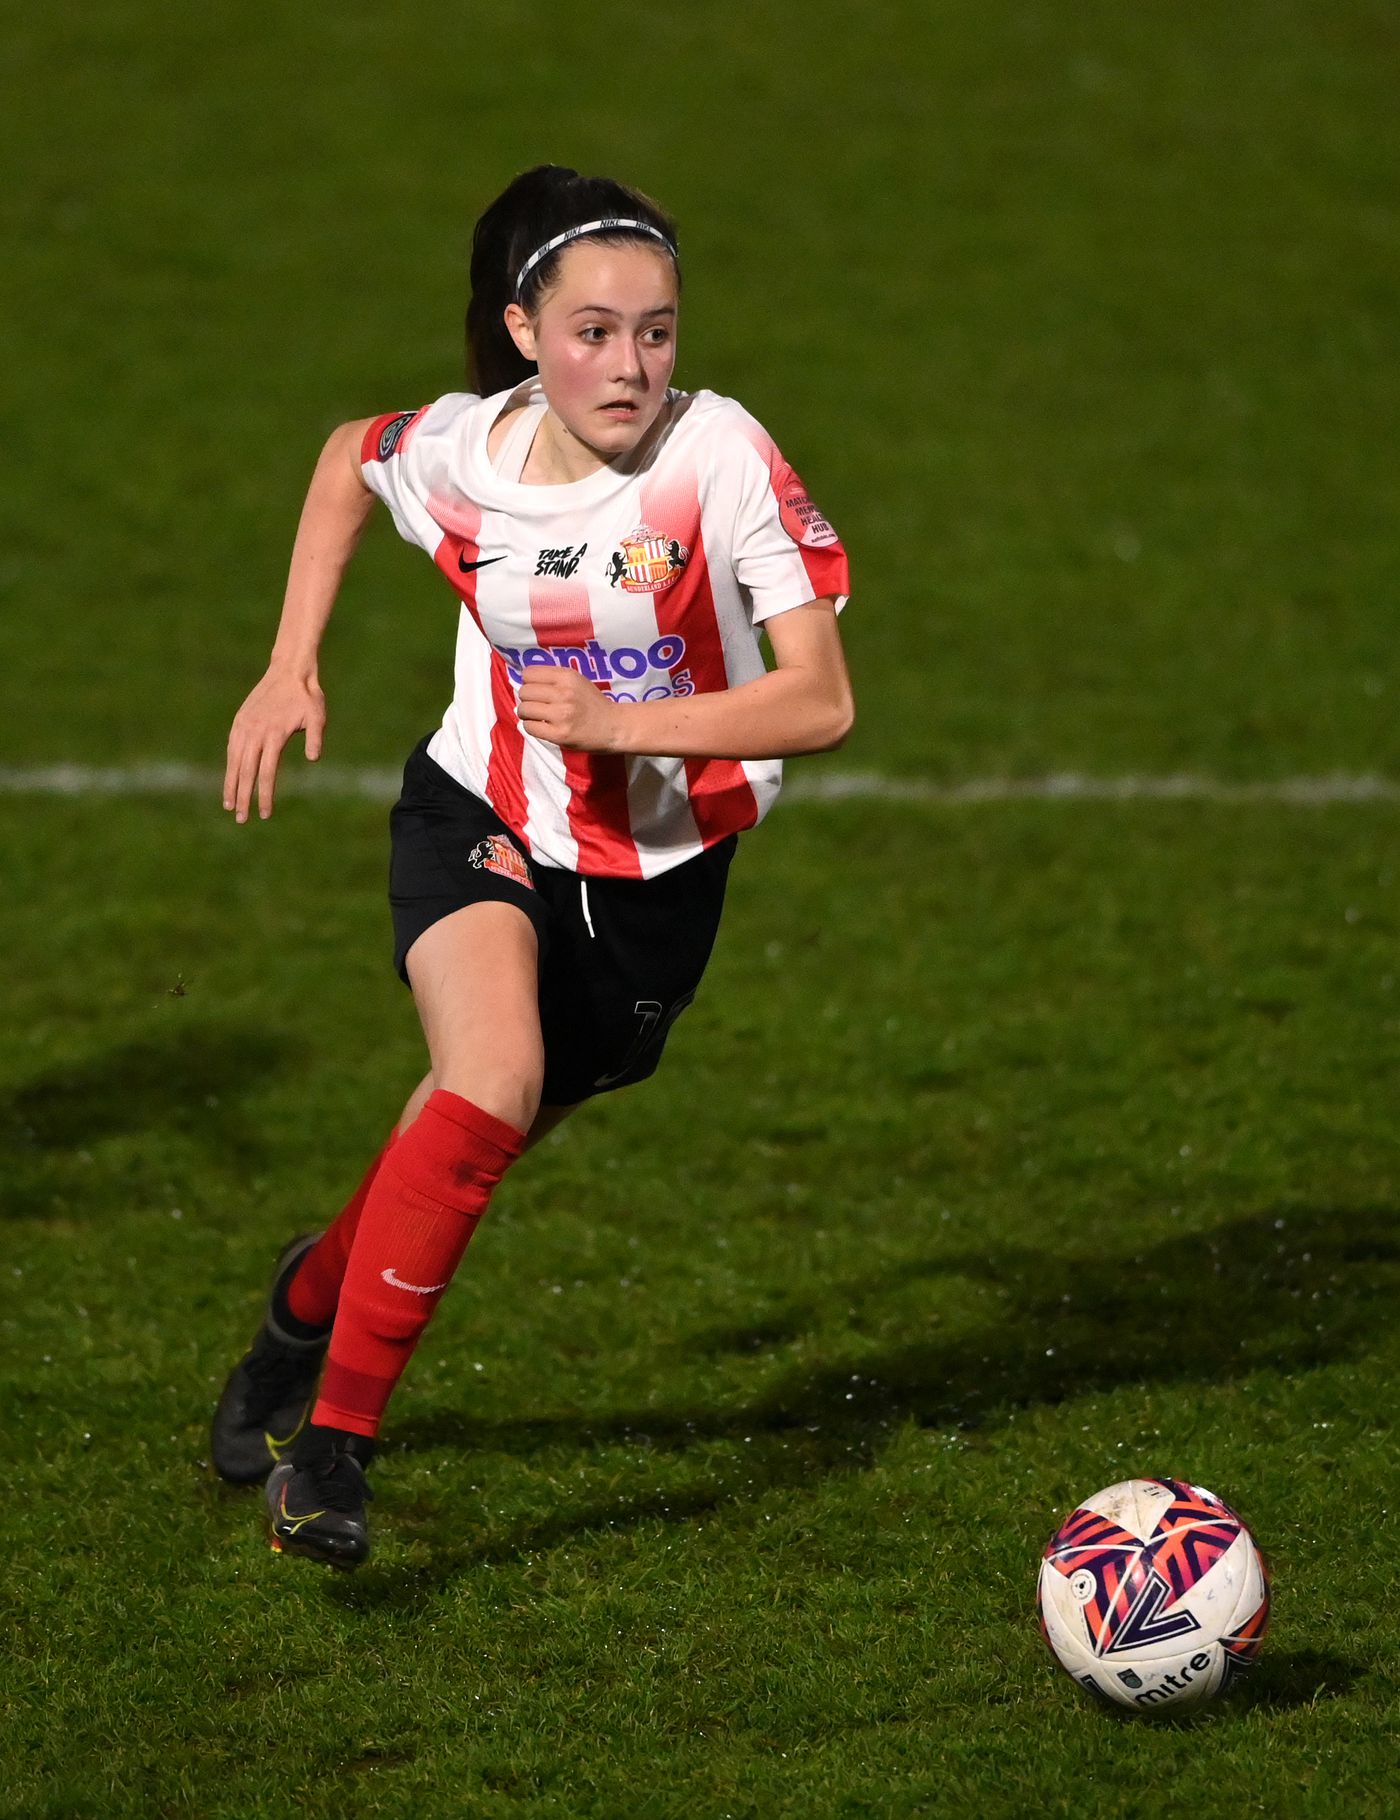 Interview & Analysis: Getting to know Sunderland Women's young starlet  Grace Ede! - Roker Report